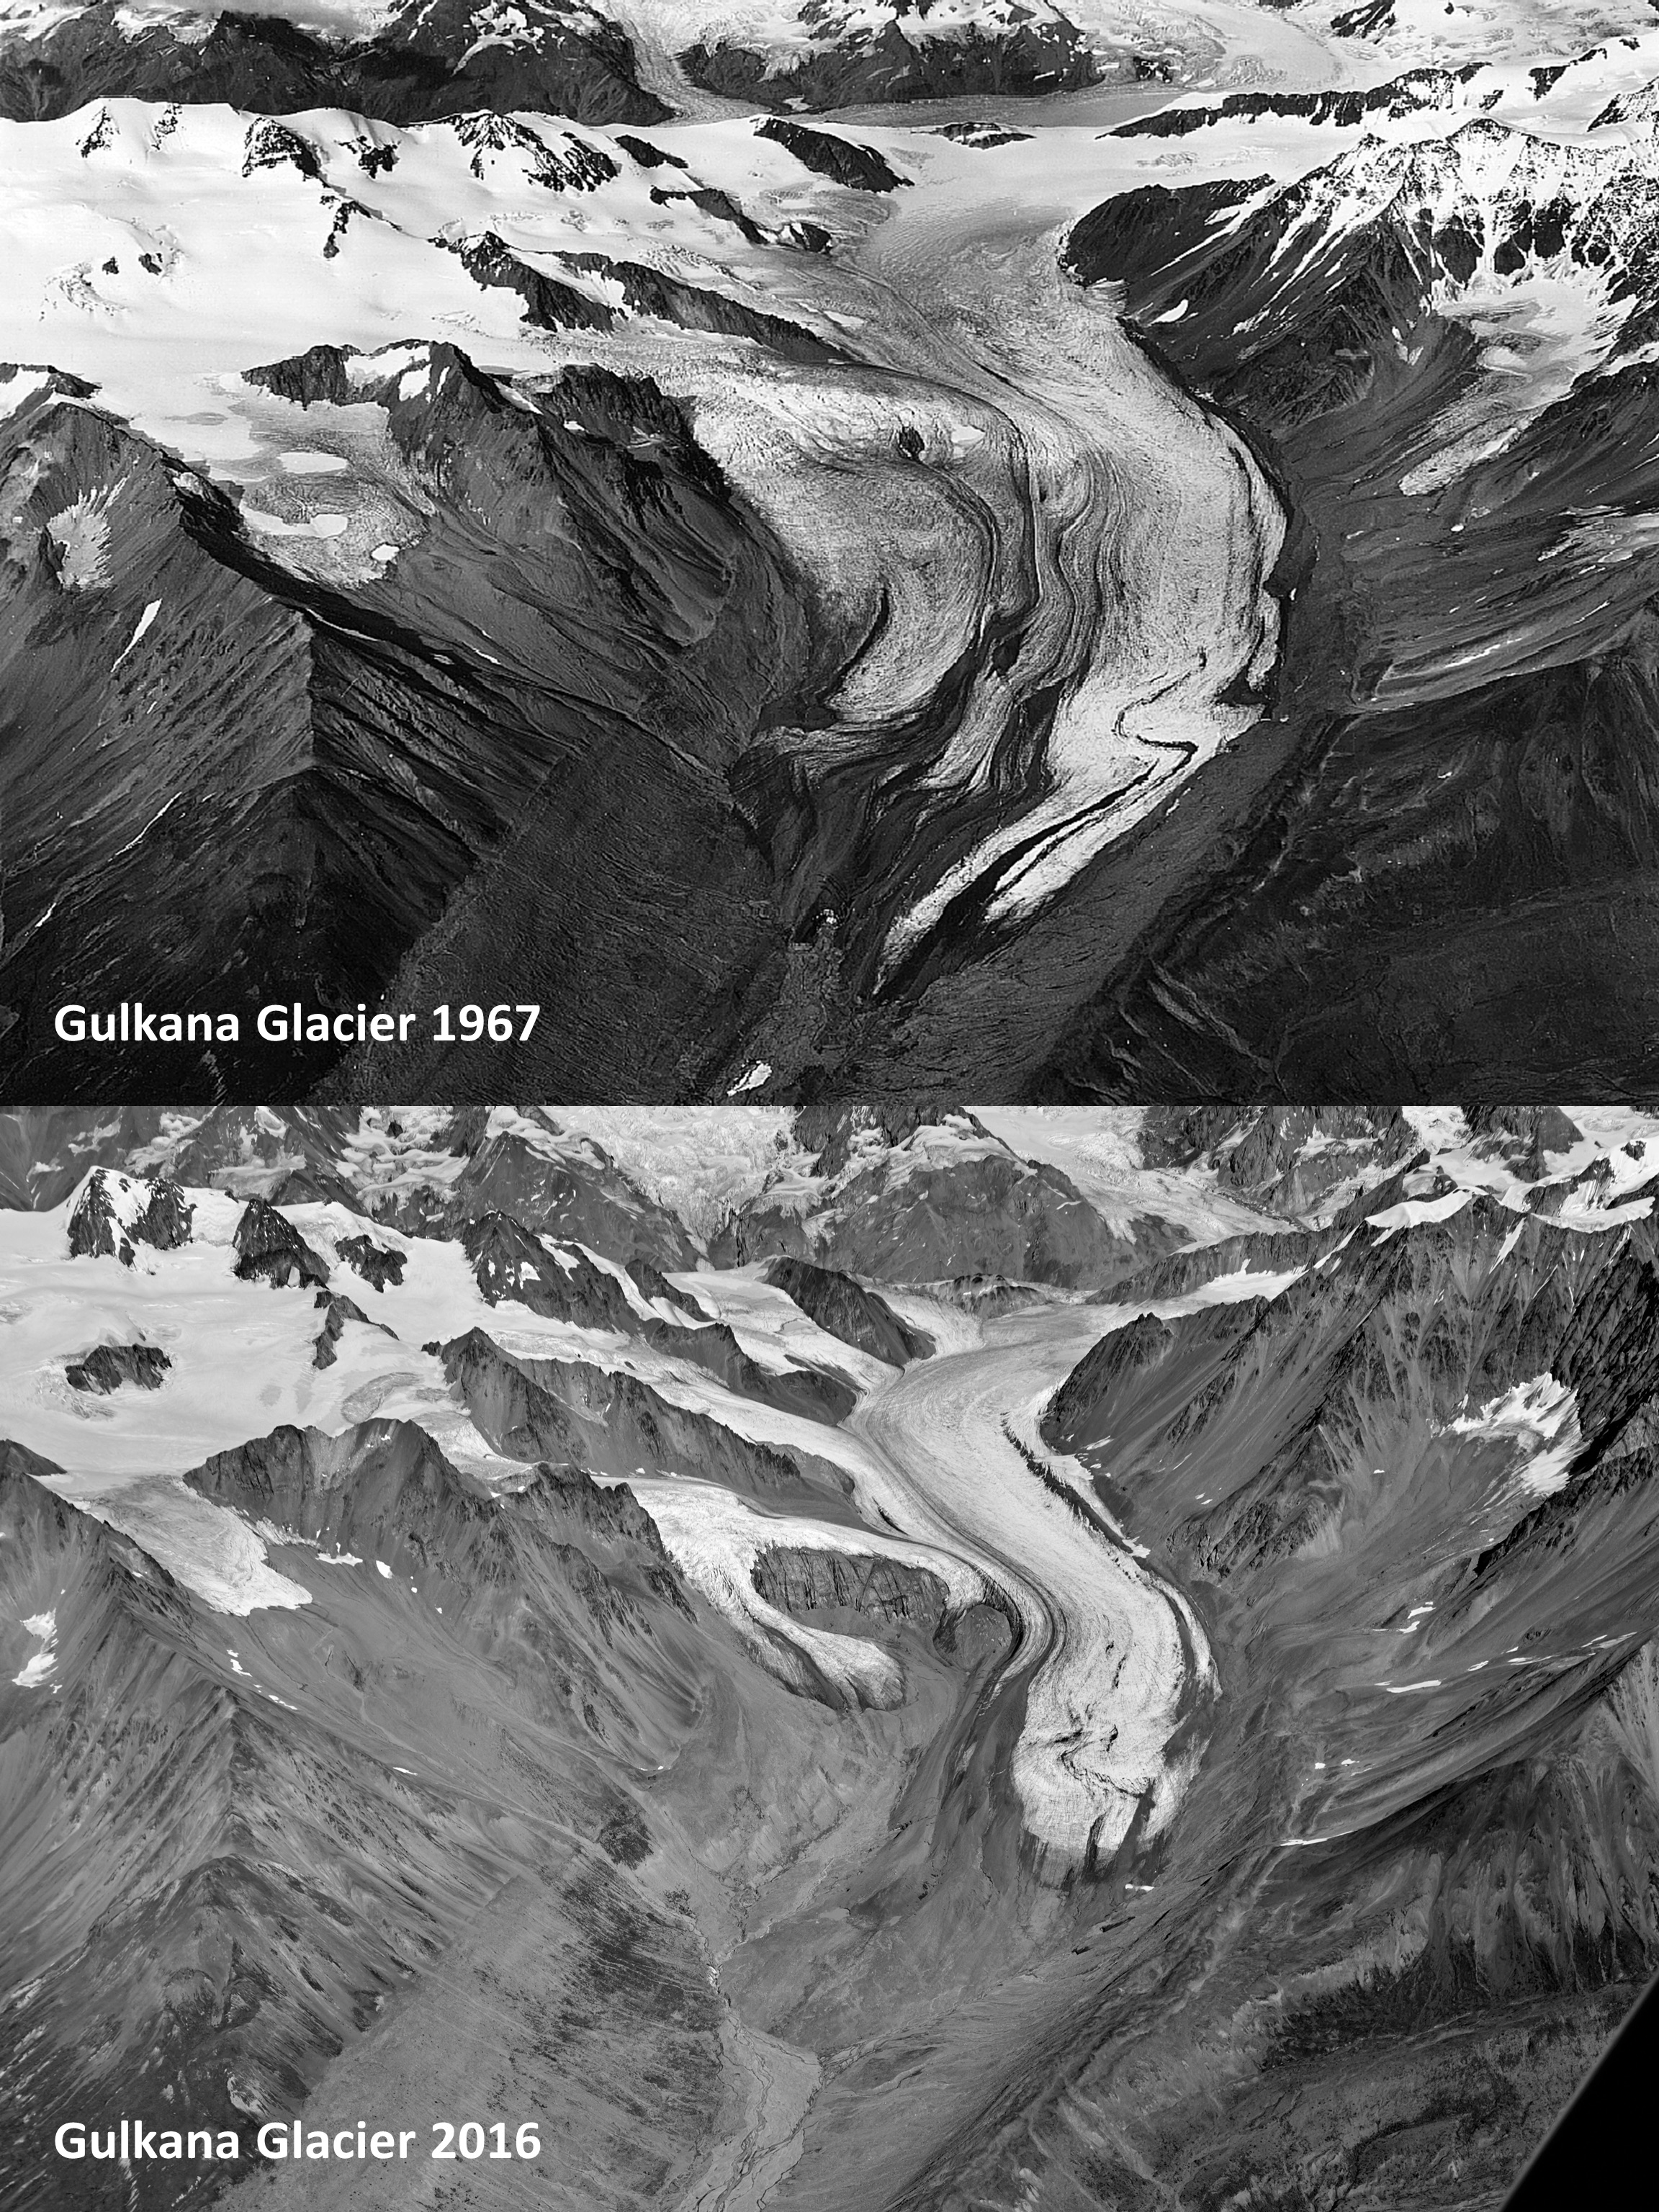 The top photo shows the Gulkana Glacier in 1967 when the US Geological Survey started a glacier mass balance monitoring program. The bottom photo is 49 years later in 2016 and shows the shrinkage of the glacier extent. The total loss of water from the glacier retreat equals a 25m deep water column spread out across the entire recent glacier area. Gulkana Glacier is in the Alaska Range south of Delta Junction. (US Geological Survey)